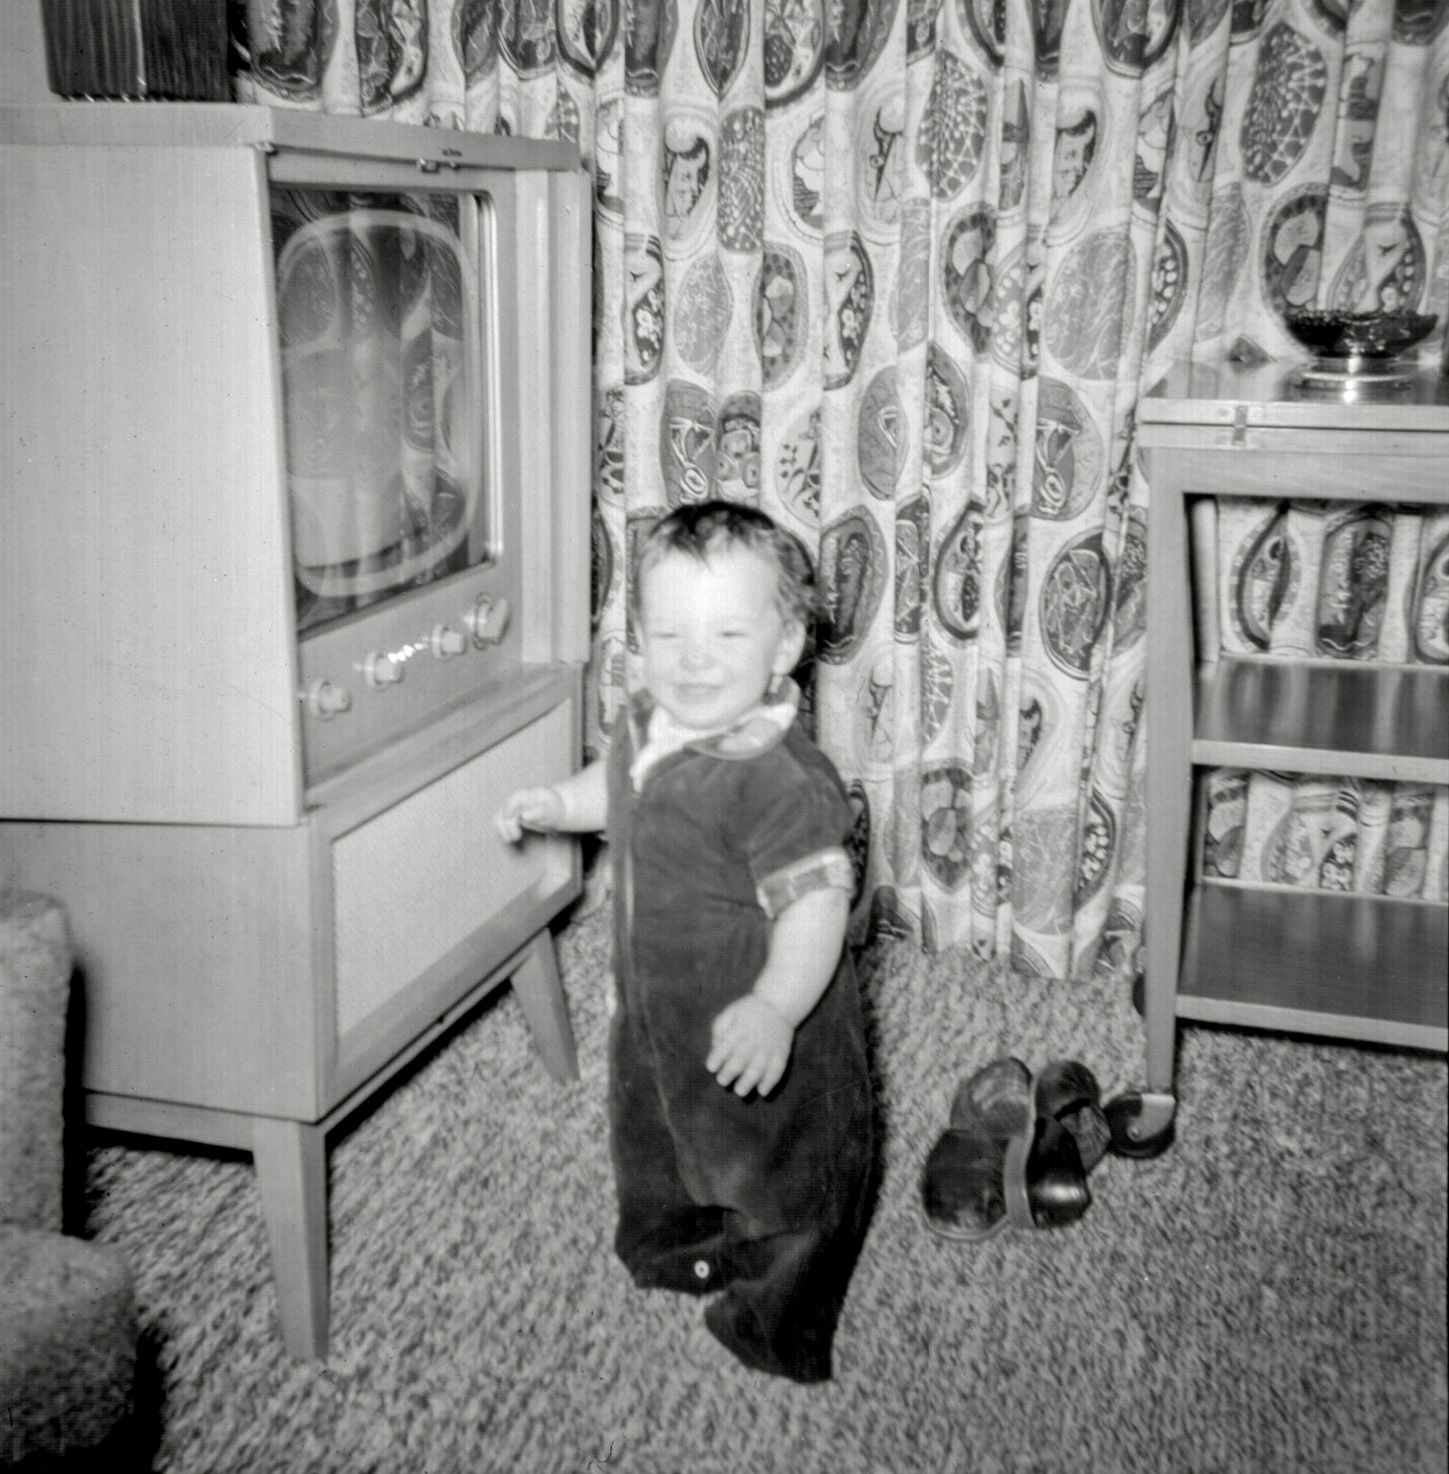 In a previous picture I mentioned our family TV. But in that picture, the doors to it were closed, making it into a piece of blonde wood, mid-century modern furniture. It was a 1951 model RCA Kendall 17T174. We only had RCA TVs because my father worked at RCA Laboratories, in Princeton New Jersey, where he was involved in the development of color television. His slippers are on the floor behind me. To the right of them is a wheeled piece of blonde wood furniture that my mother called a tea wagon. Behind them all is a closer look at the very fifties fabric of the curtains my mother sewed for that living room. View full size.